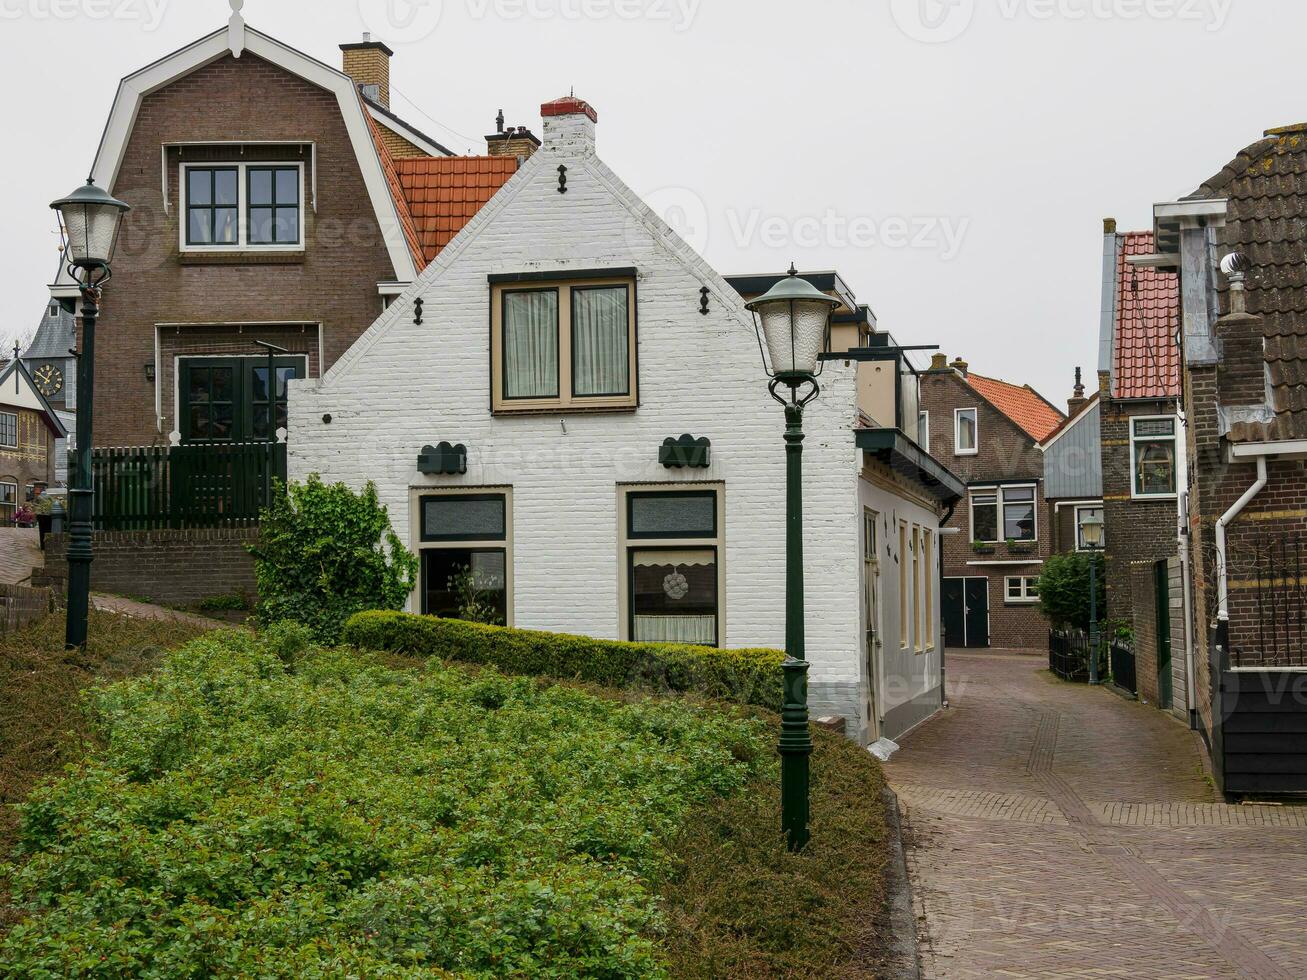 urk city in the netheralnds photo